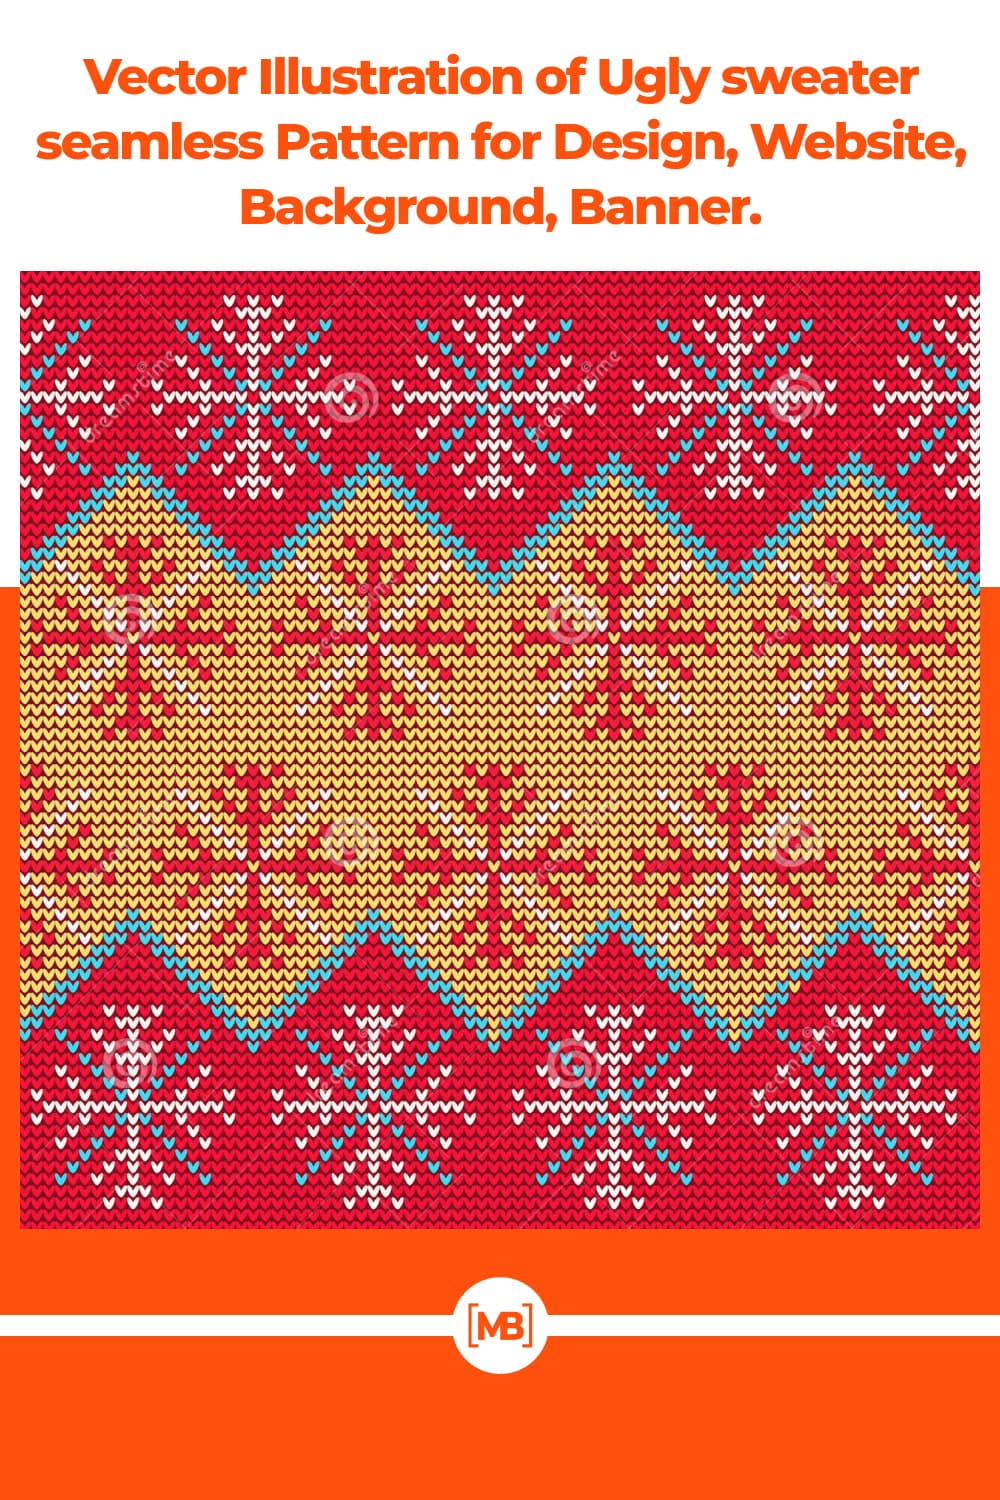 Snowy print for Christmas. Fine and fine embroidery with red and white snowflakes.